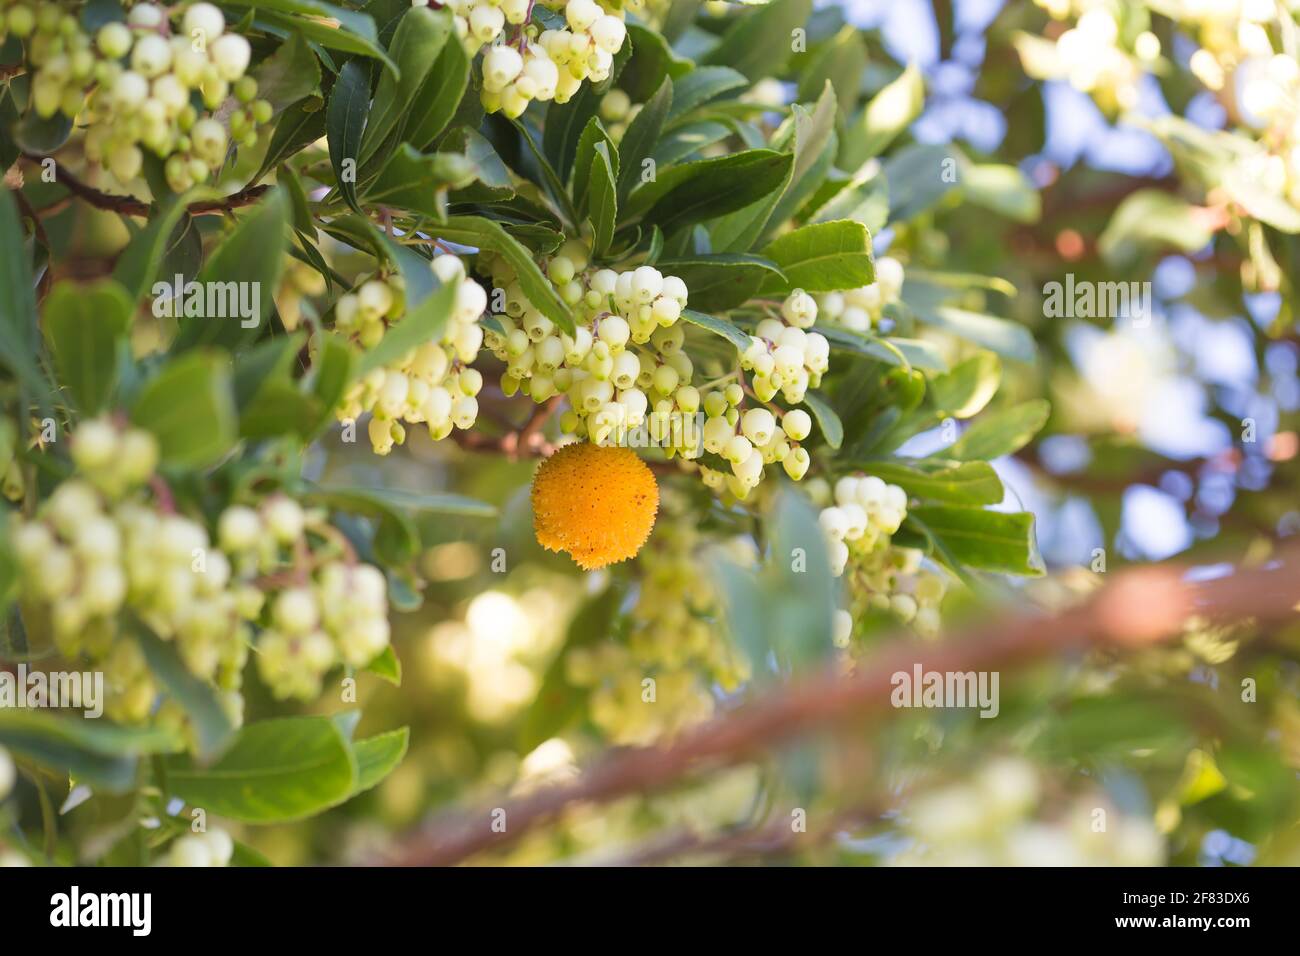 Arbousier (Arbutus unedo), the strawberry tree - small tree in the flowering plant family Ericaceae Stock Photo